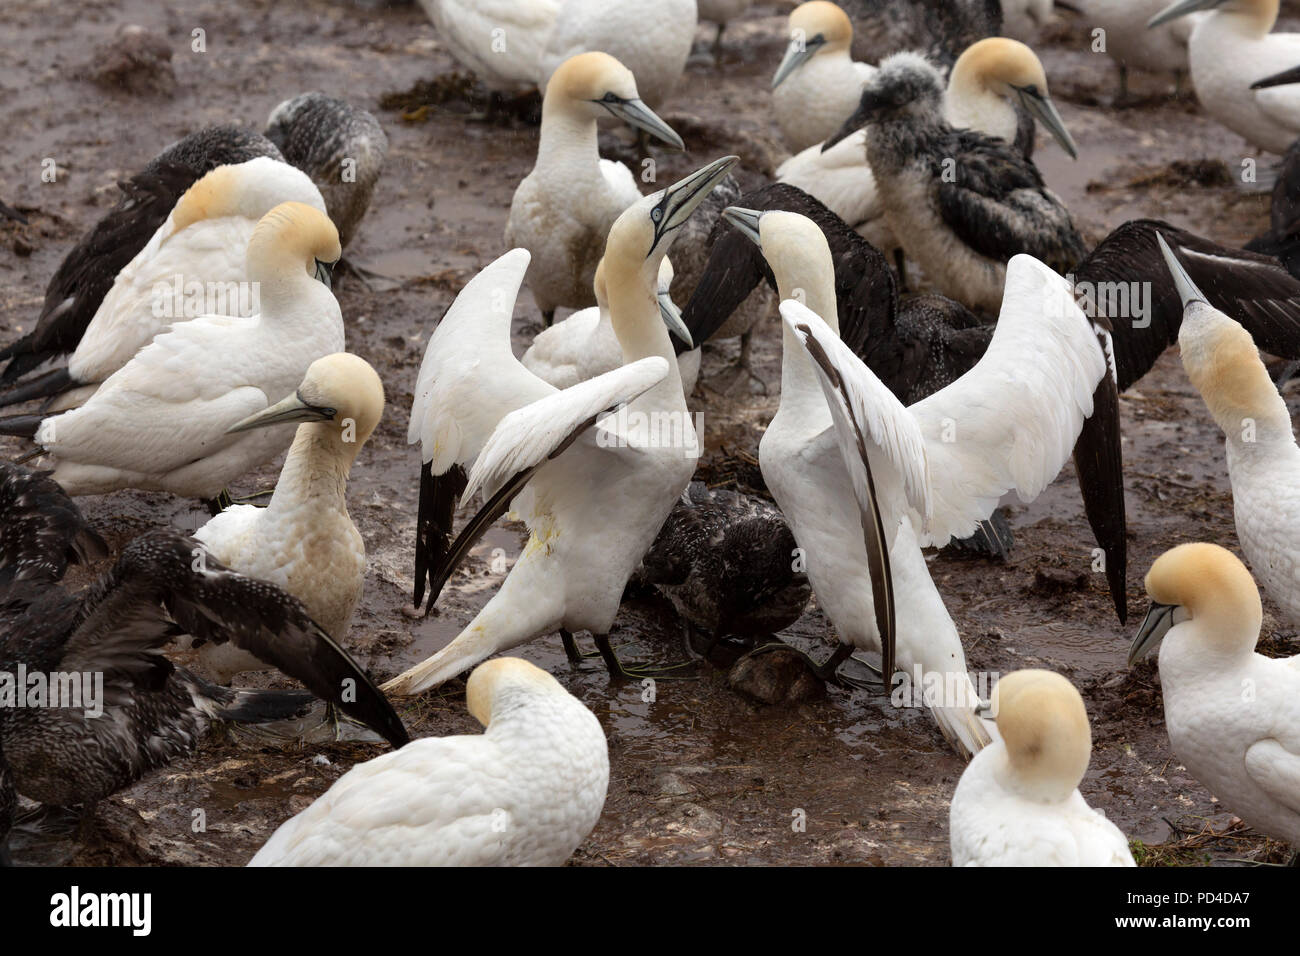 Northern gannets (Morus bassanus) on Bonaventure Island, Canada. The island is home to one of the world's largest northern gannet colonies. Stock Photo